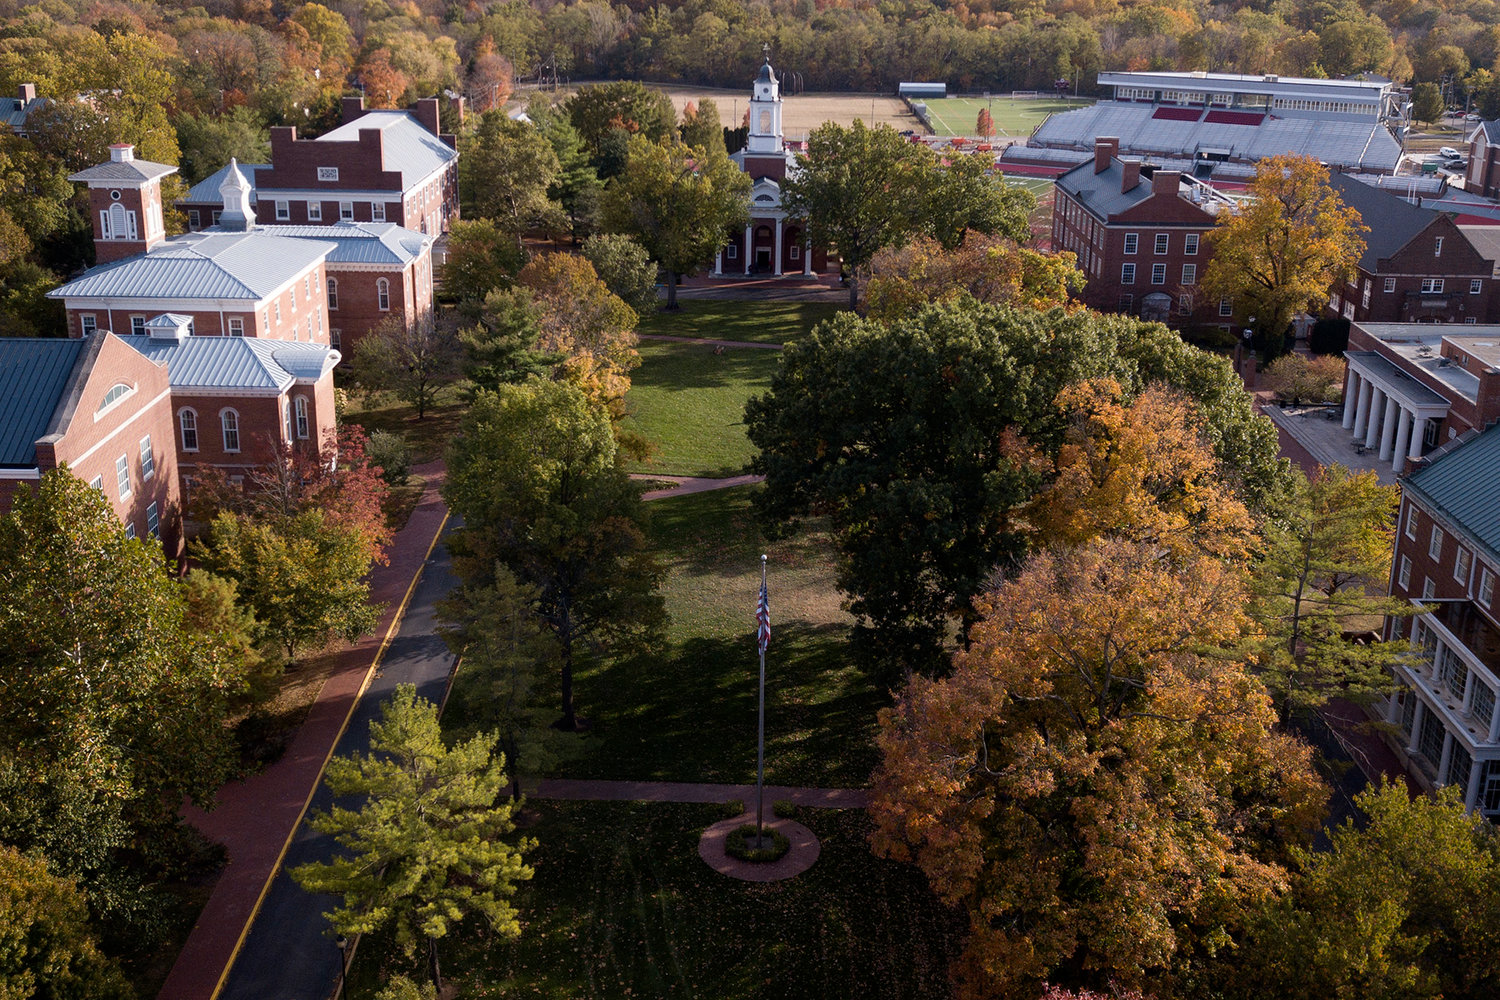 An aerial view of the Wabash College campus in Crawfordsville. The 189-year-old liberal arts college for men was named one of 200 Best Value Colleges by The Princeton Review.